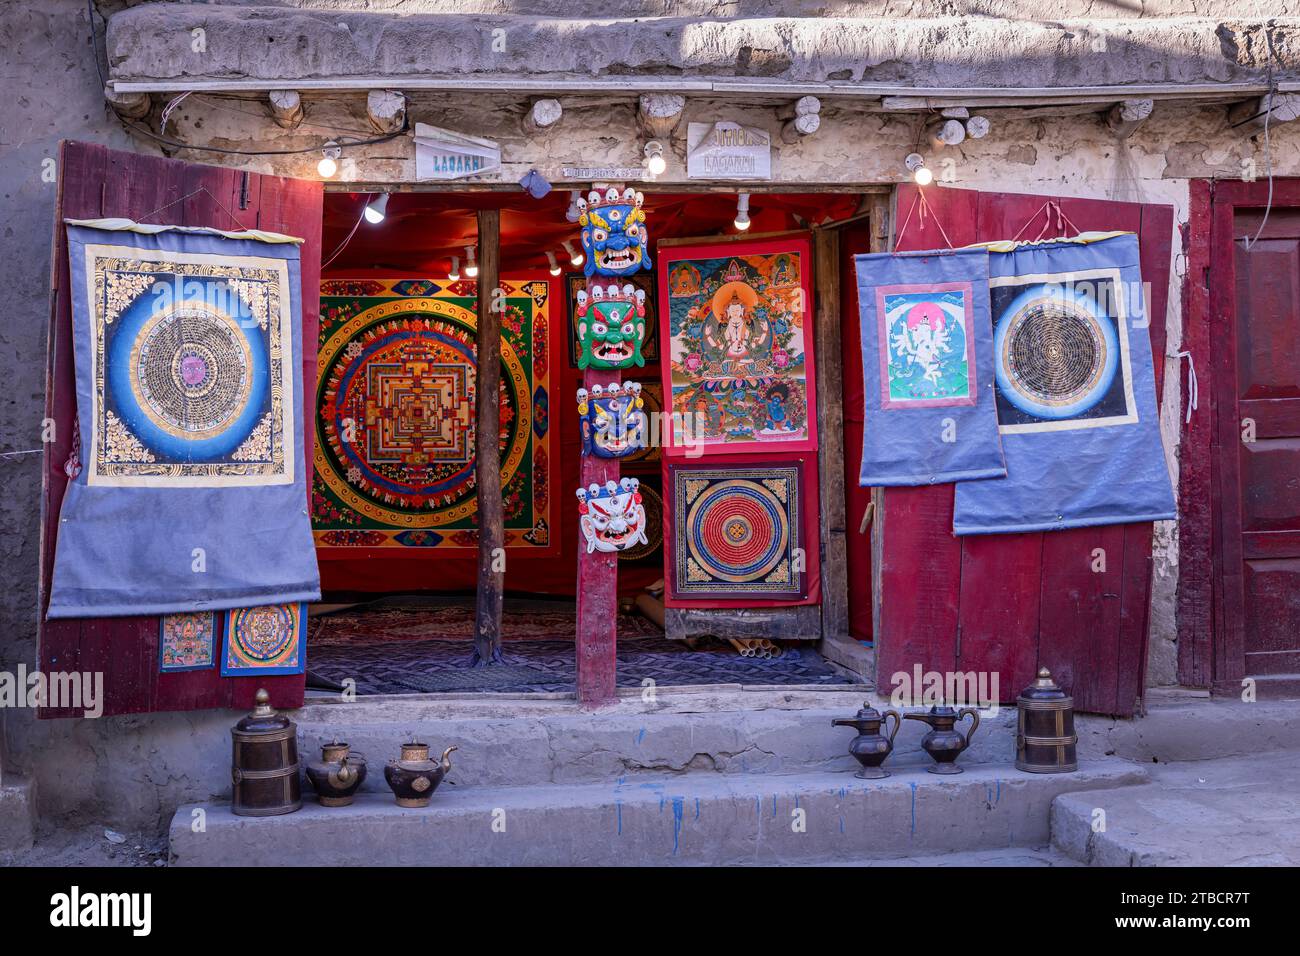 Small shop selling artefacts from Ladakh, Leh, India Stock Photo